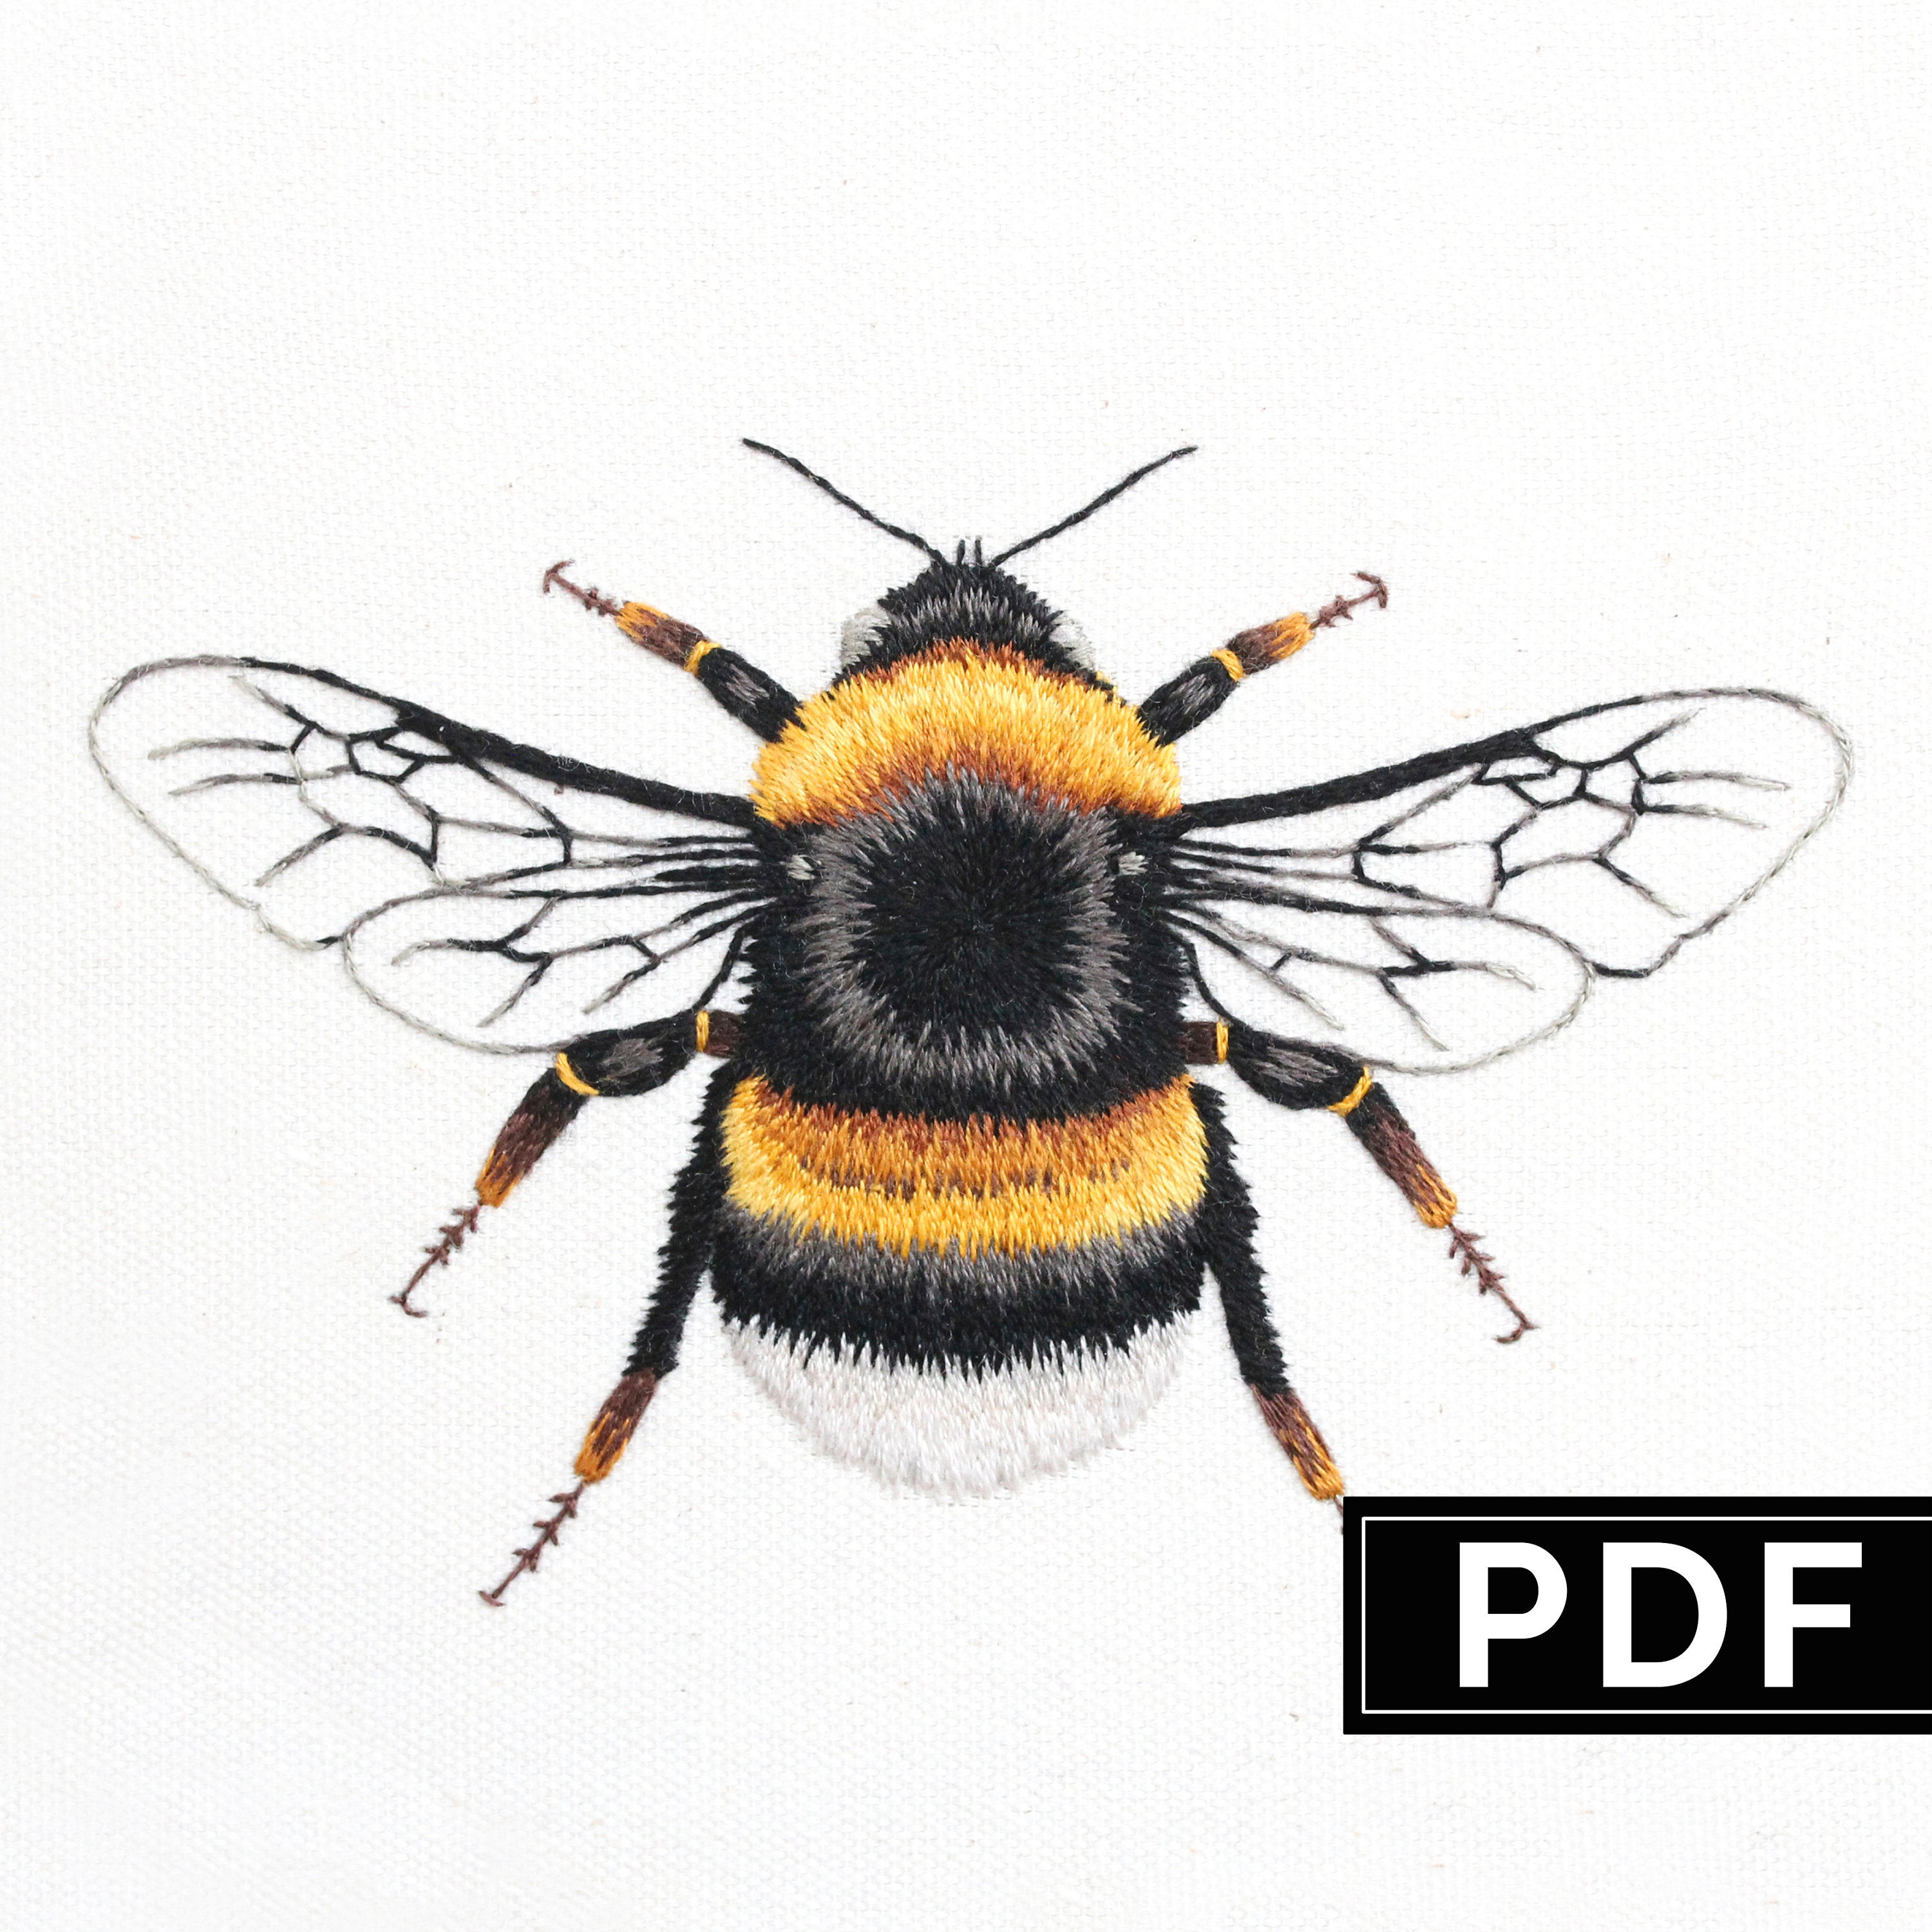 Bee Embroidery Pattern Bee Hand Embroidery Pattern Thread Painting Tutorial Pdf Digital Embroidery Guide Learn How To Paint With Thread Bumblebee Hoop Art